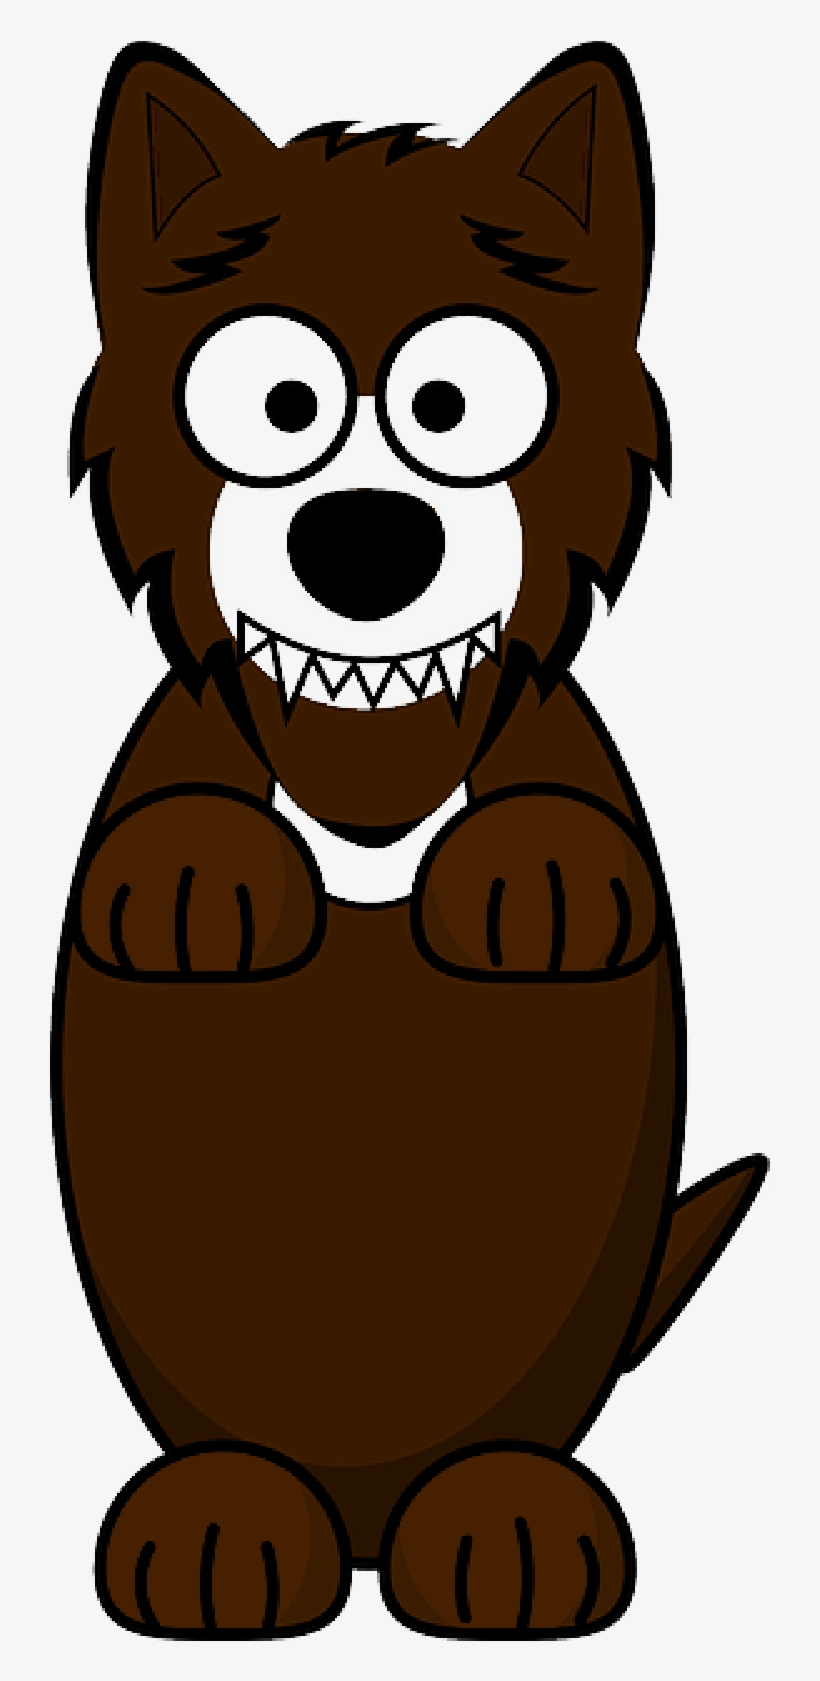 Mb Image/png - Brown Wolf Cartoon Shower Curtain, transparent png #905923